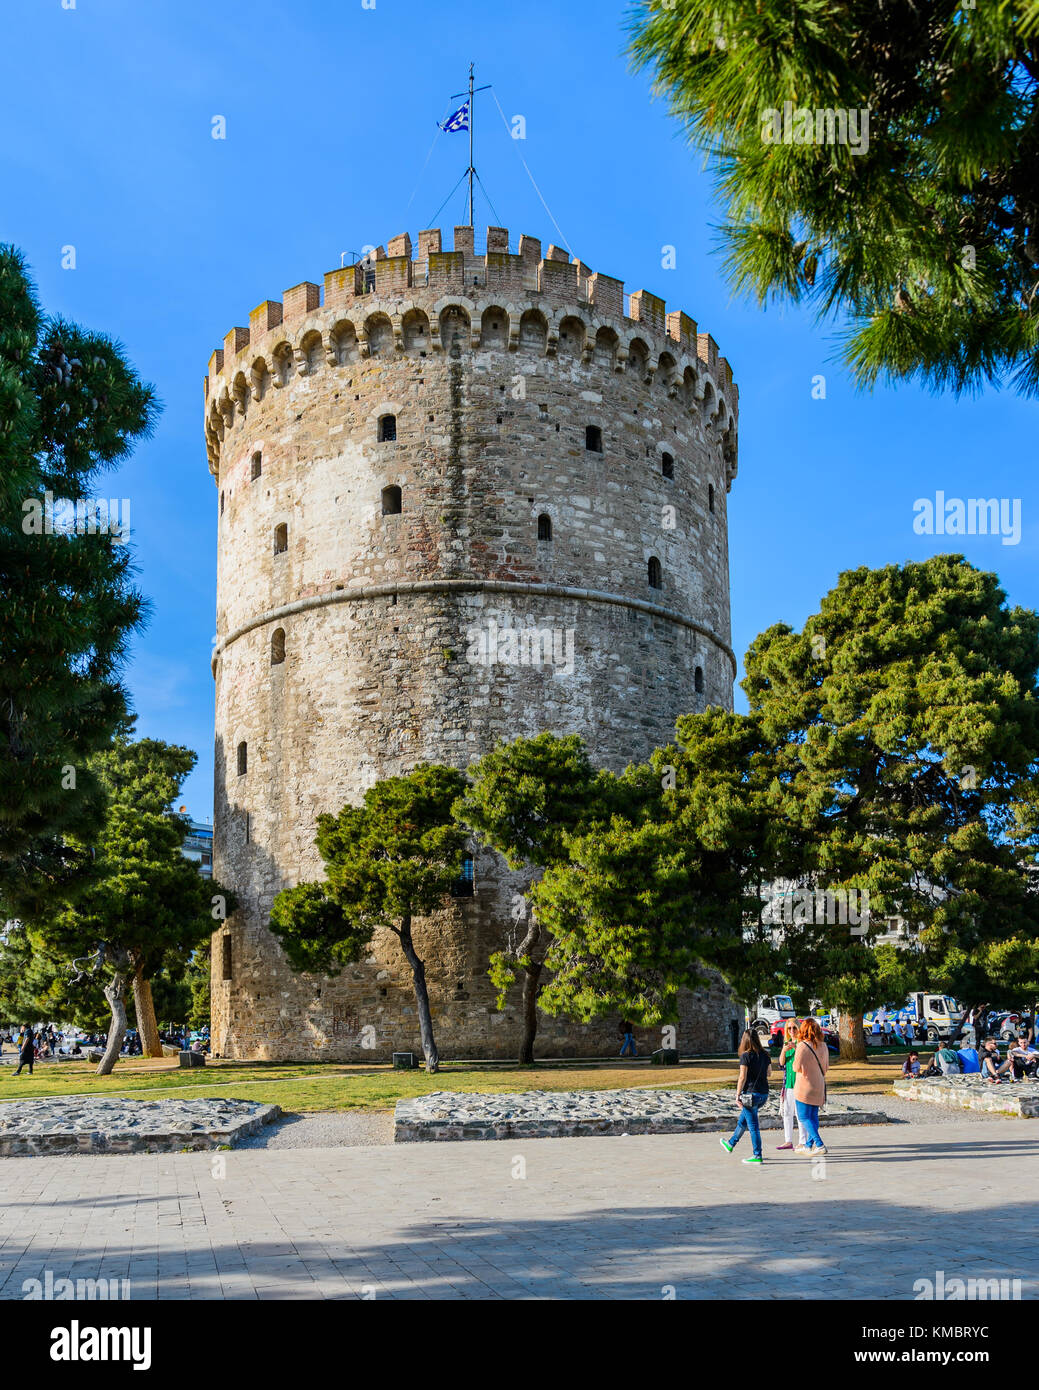 The white tower in Thessaloniki, Greece Stock Photo